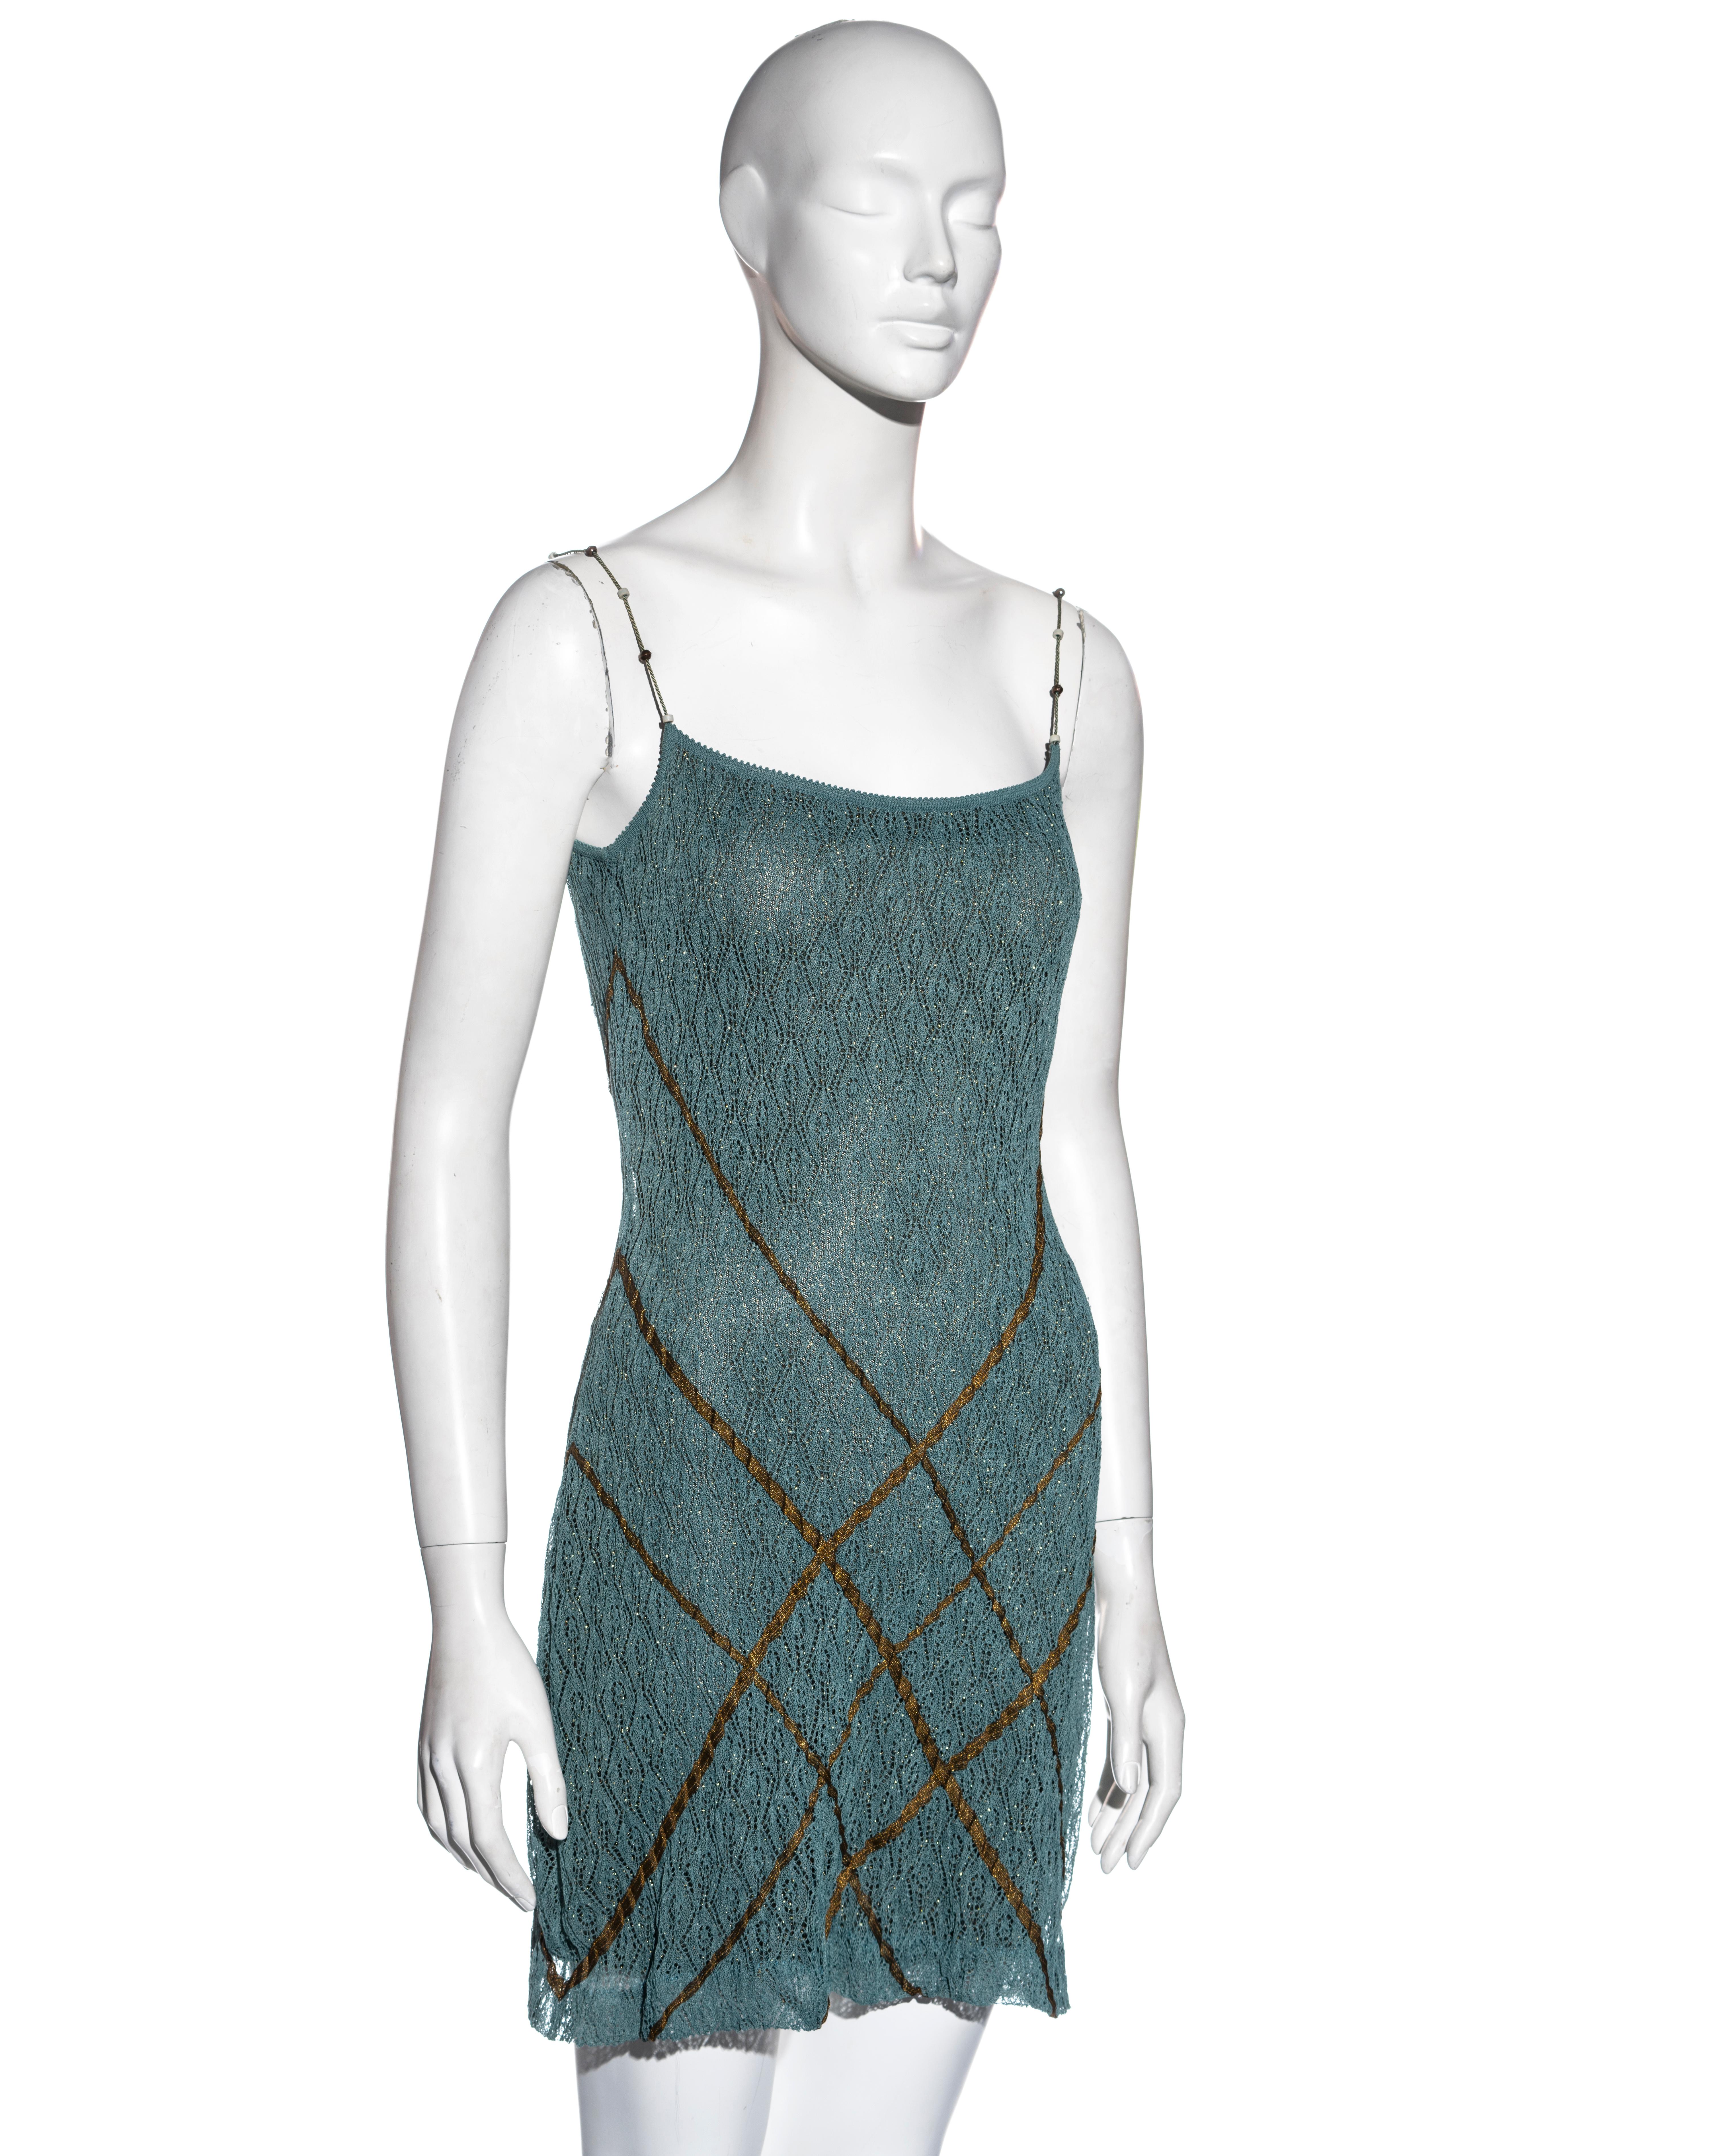 Gray Christian Dior by John Galliano teal double-layered knitted lace dress, ss 1999 For Sale